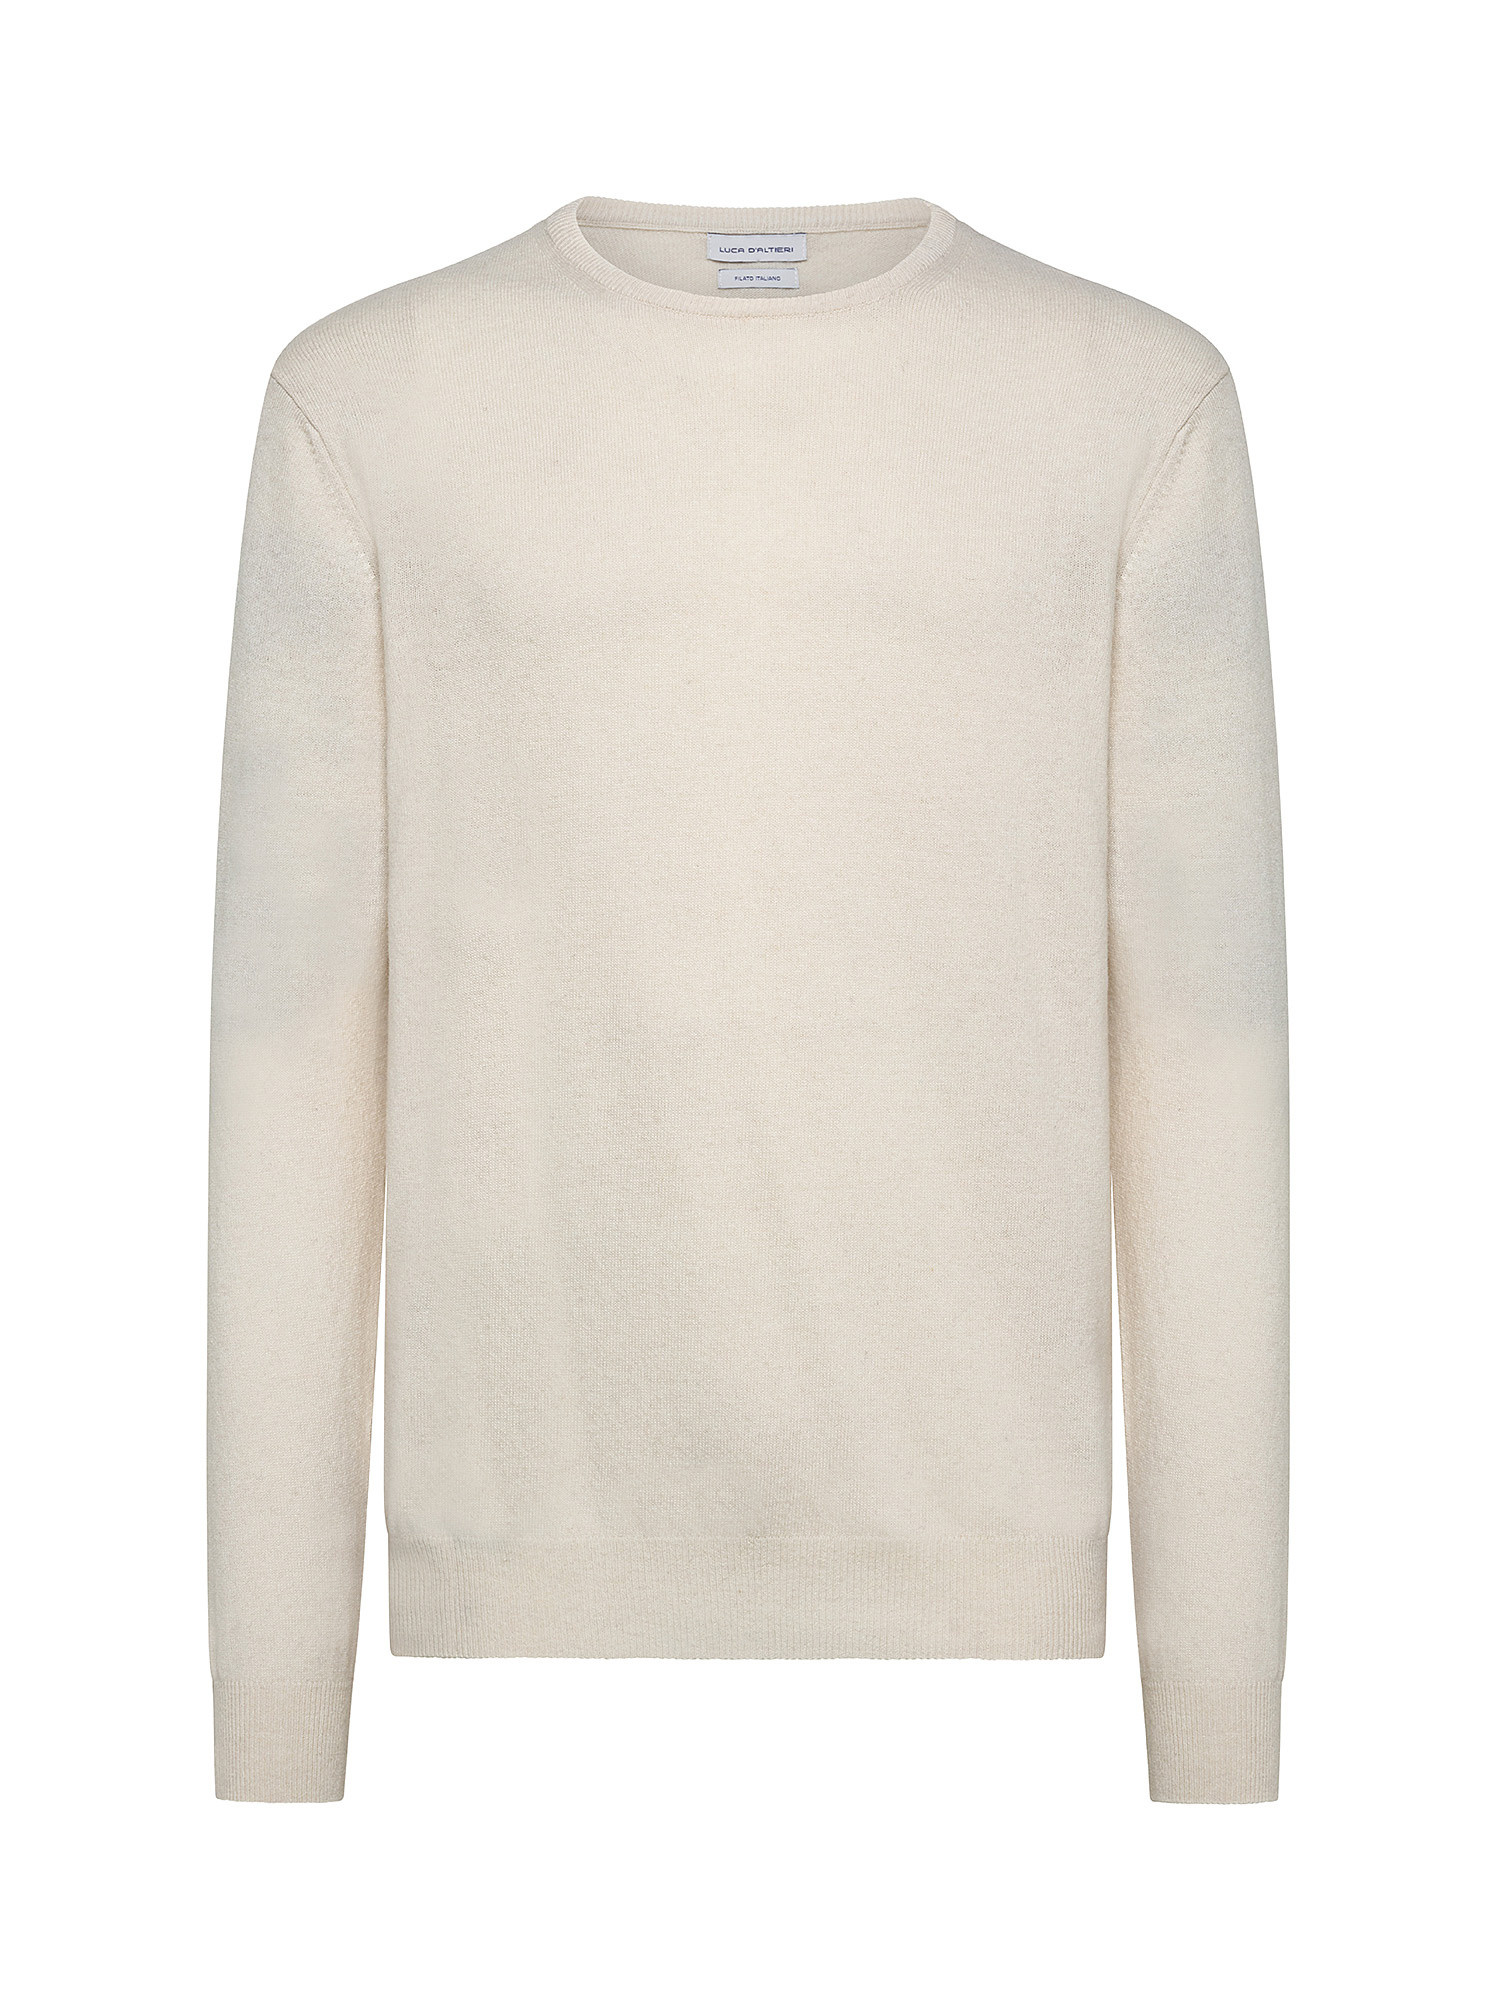 Cashmere Blend crewneck sweater with noble fibers, Off White, large image number 0